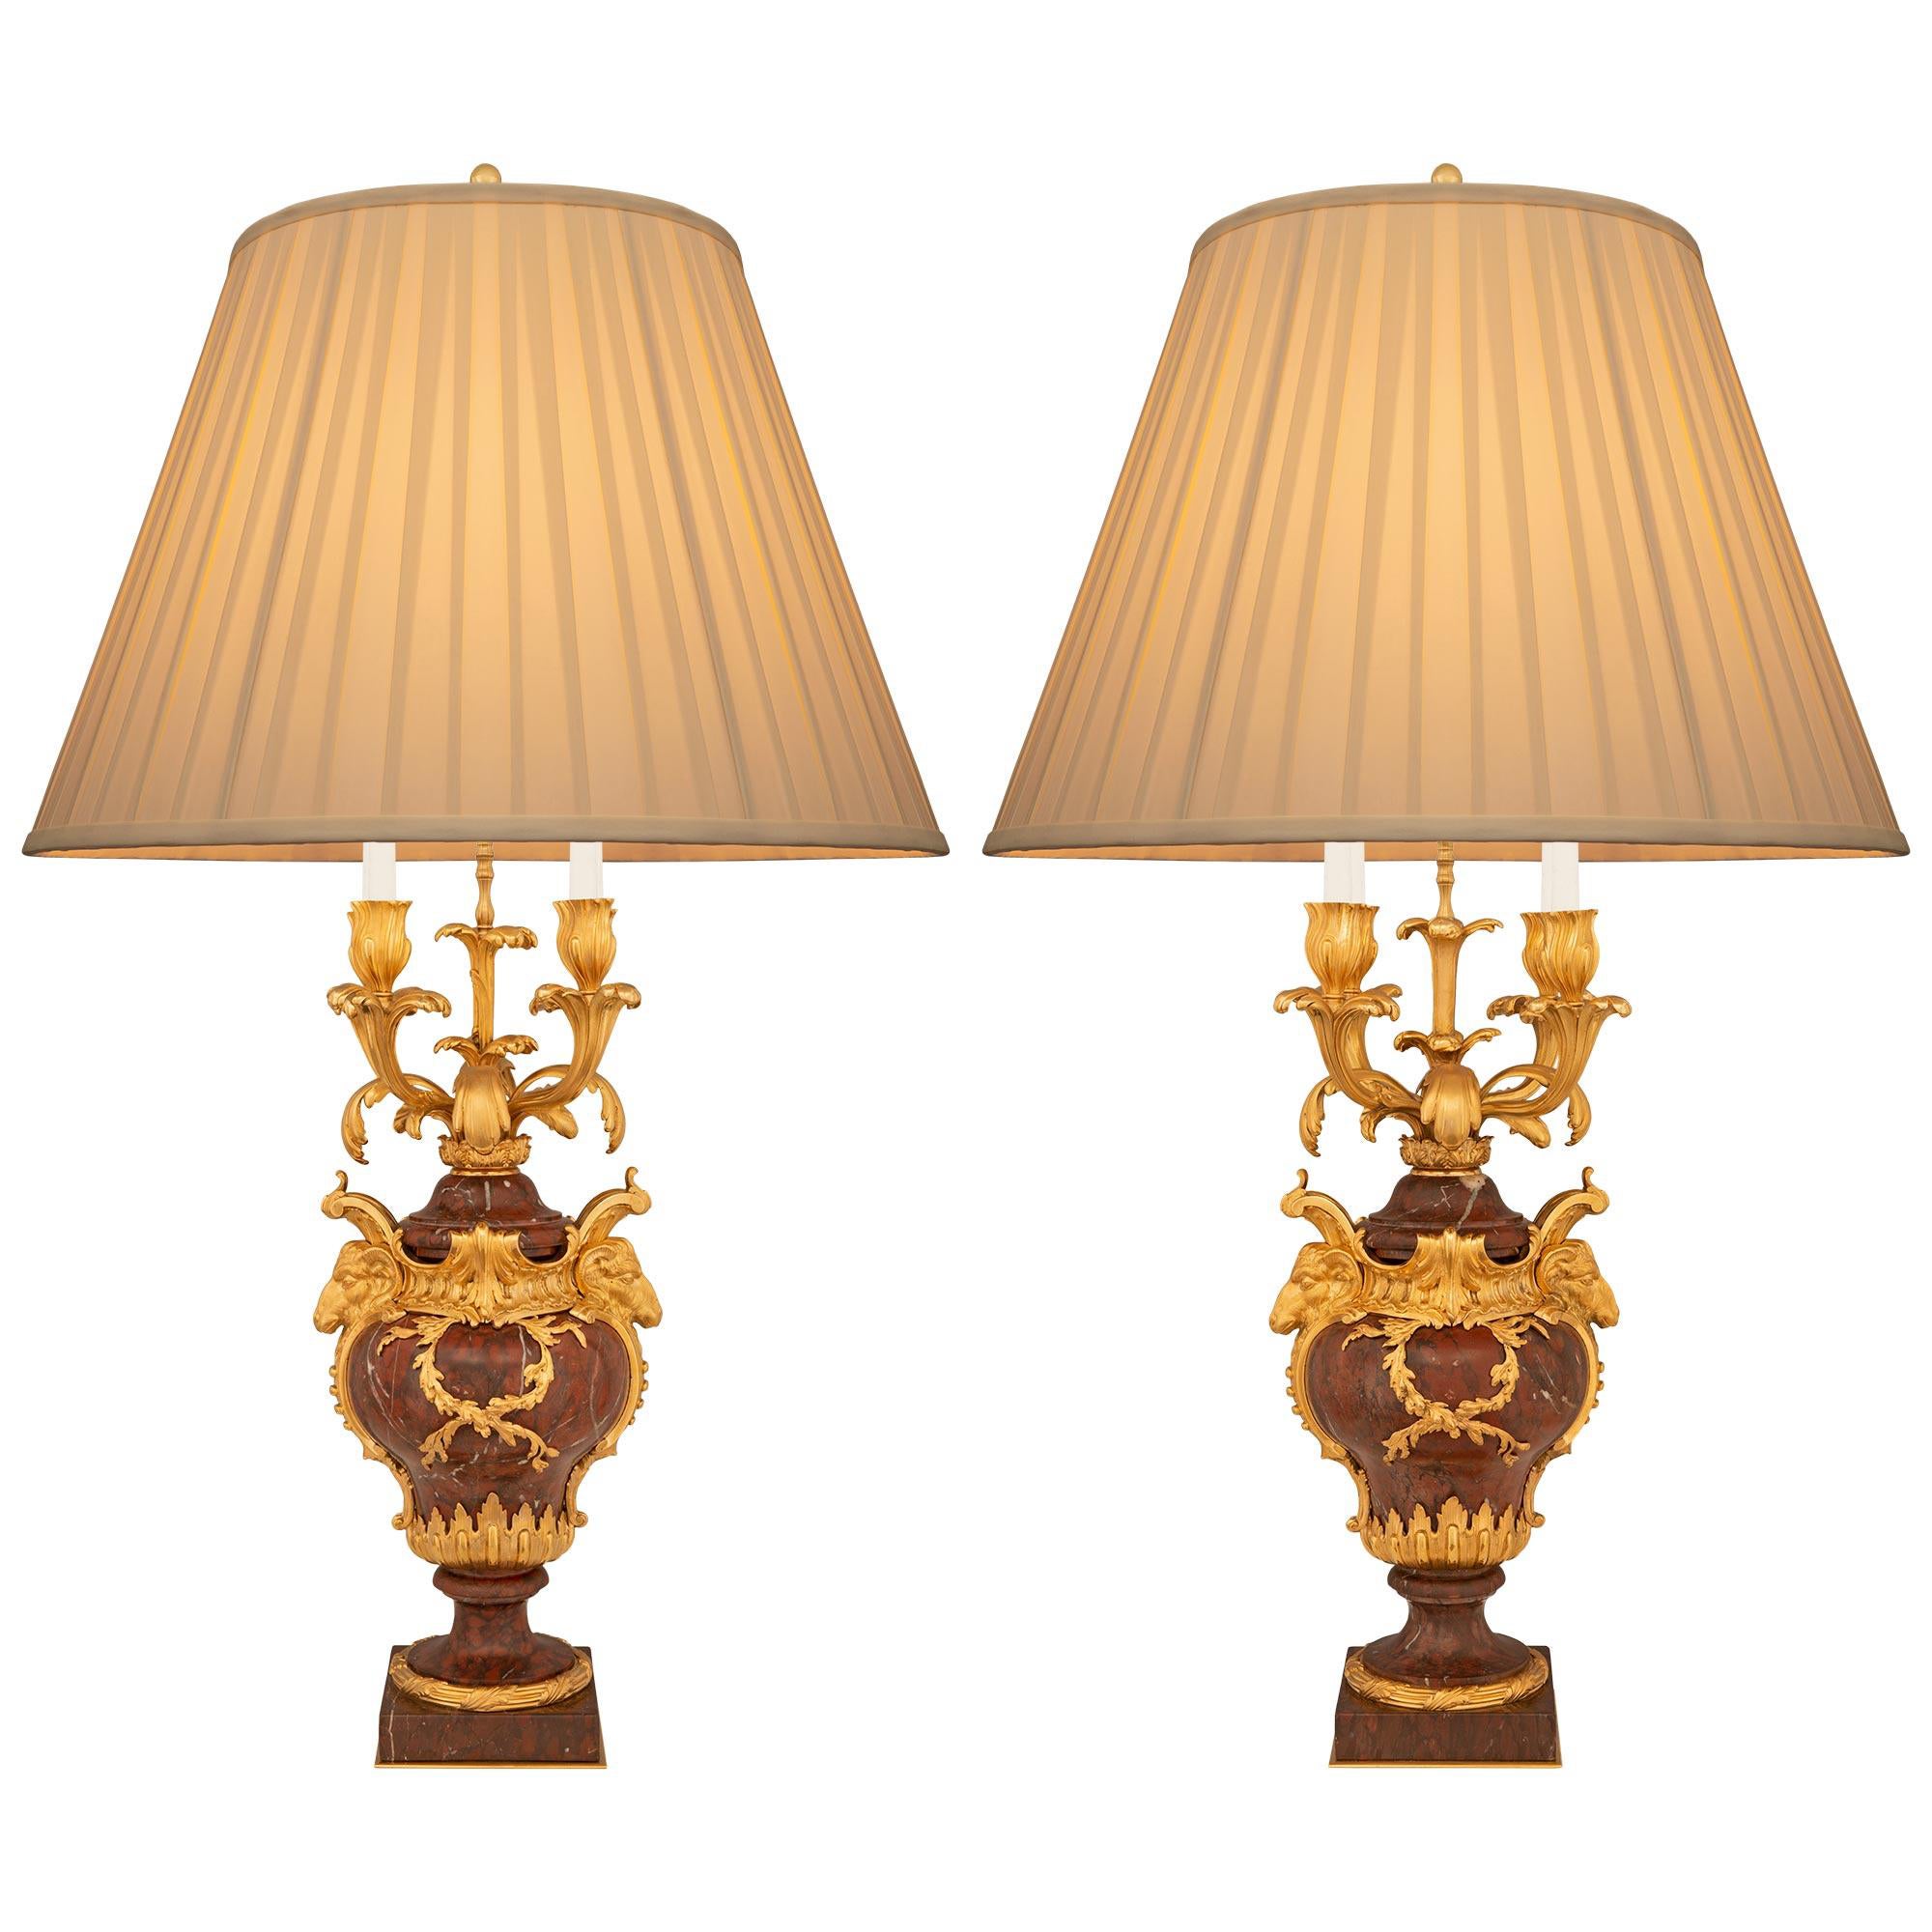 Pair Of French 19th Century Louis XV St. Marble And Ormolu Candelabra Lamps For Sale